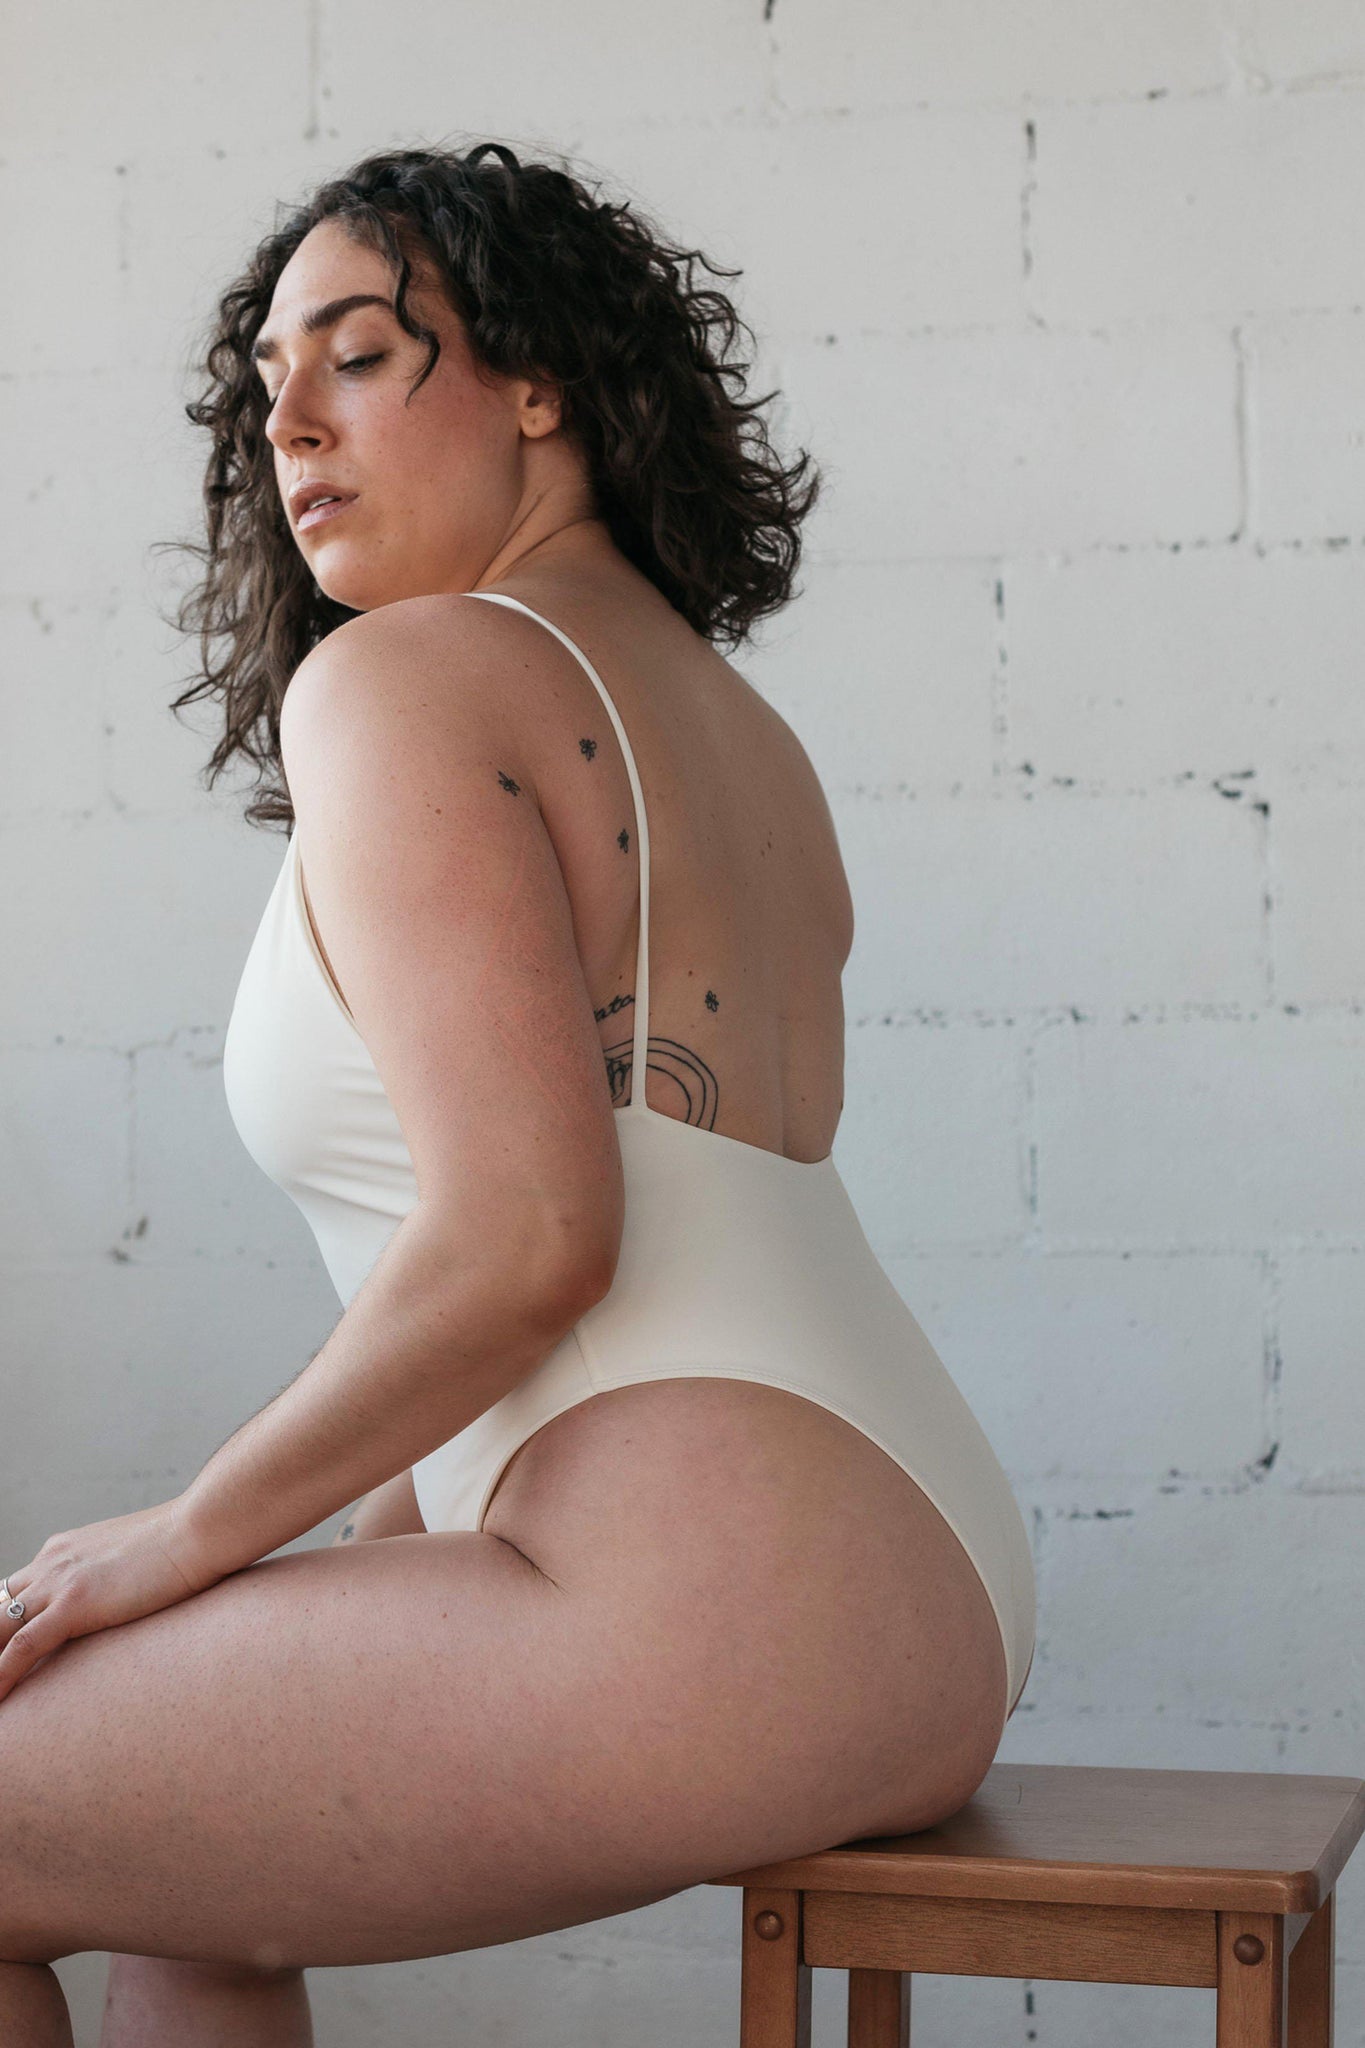 The side view of a woman sitting on a stool wearing a white one-piece swimsuit featuring spaghetti straps and a low back.